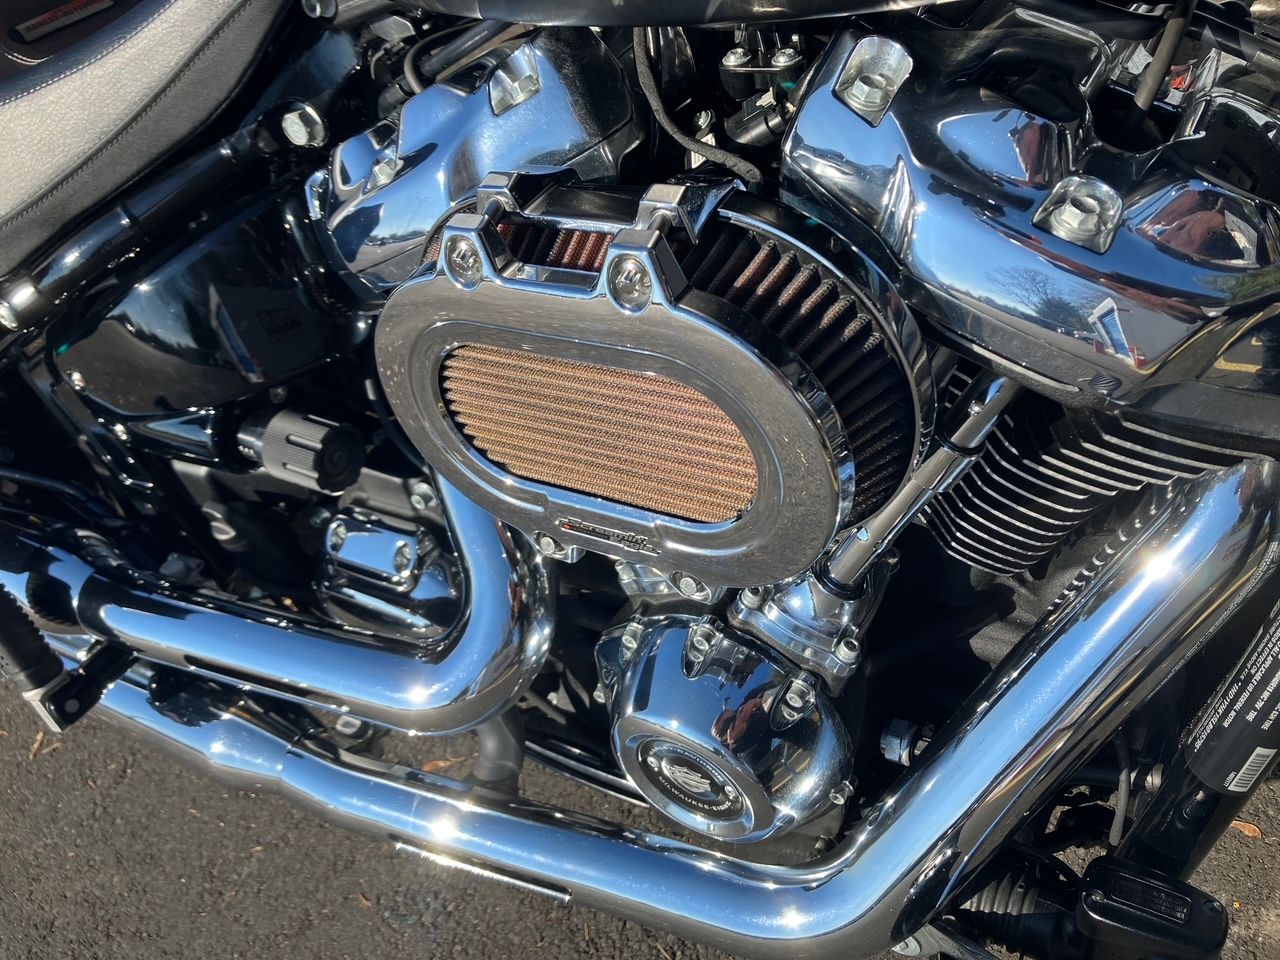 2020 Harley-Davidson BREAKOUT in West Long Branch, New Jersey - Photo 6